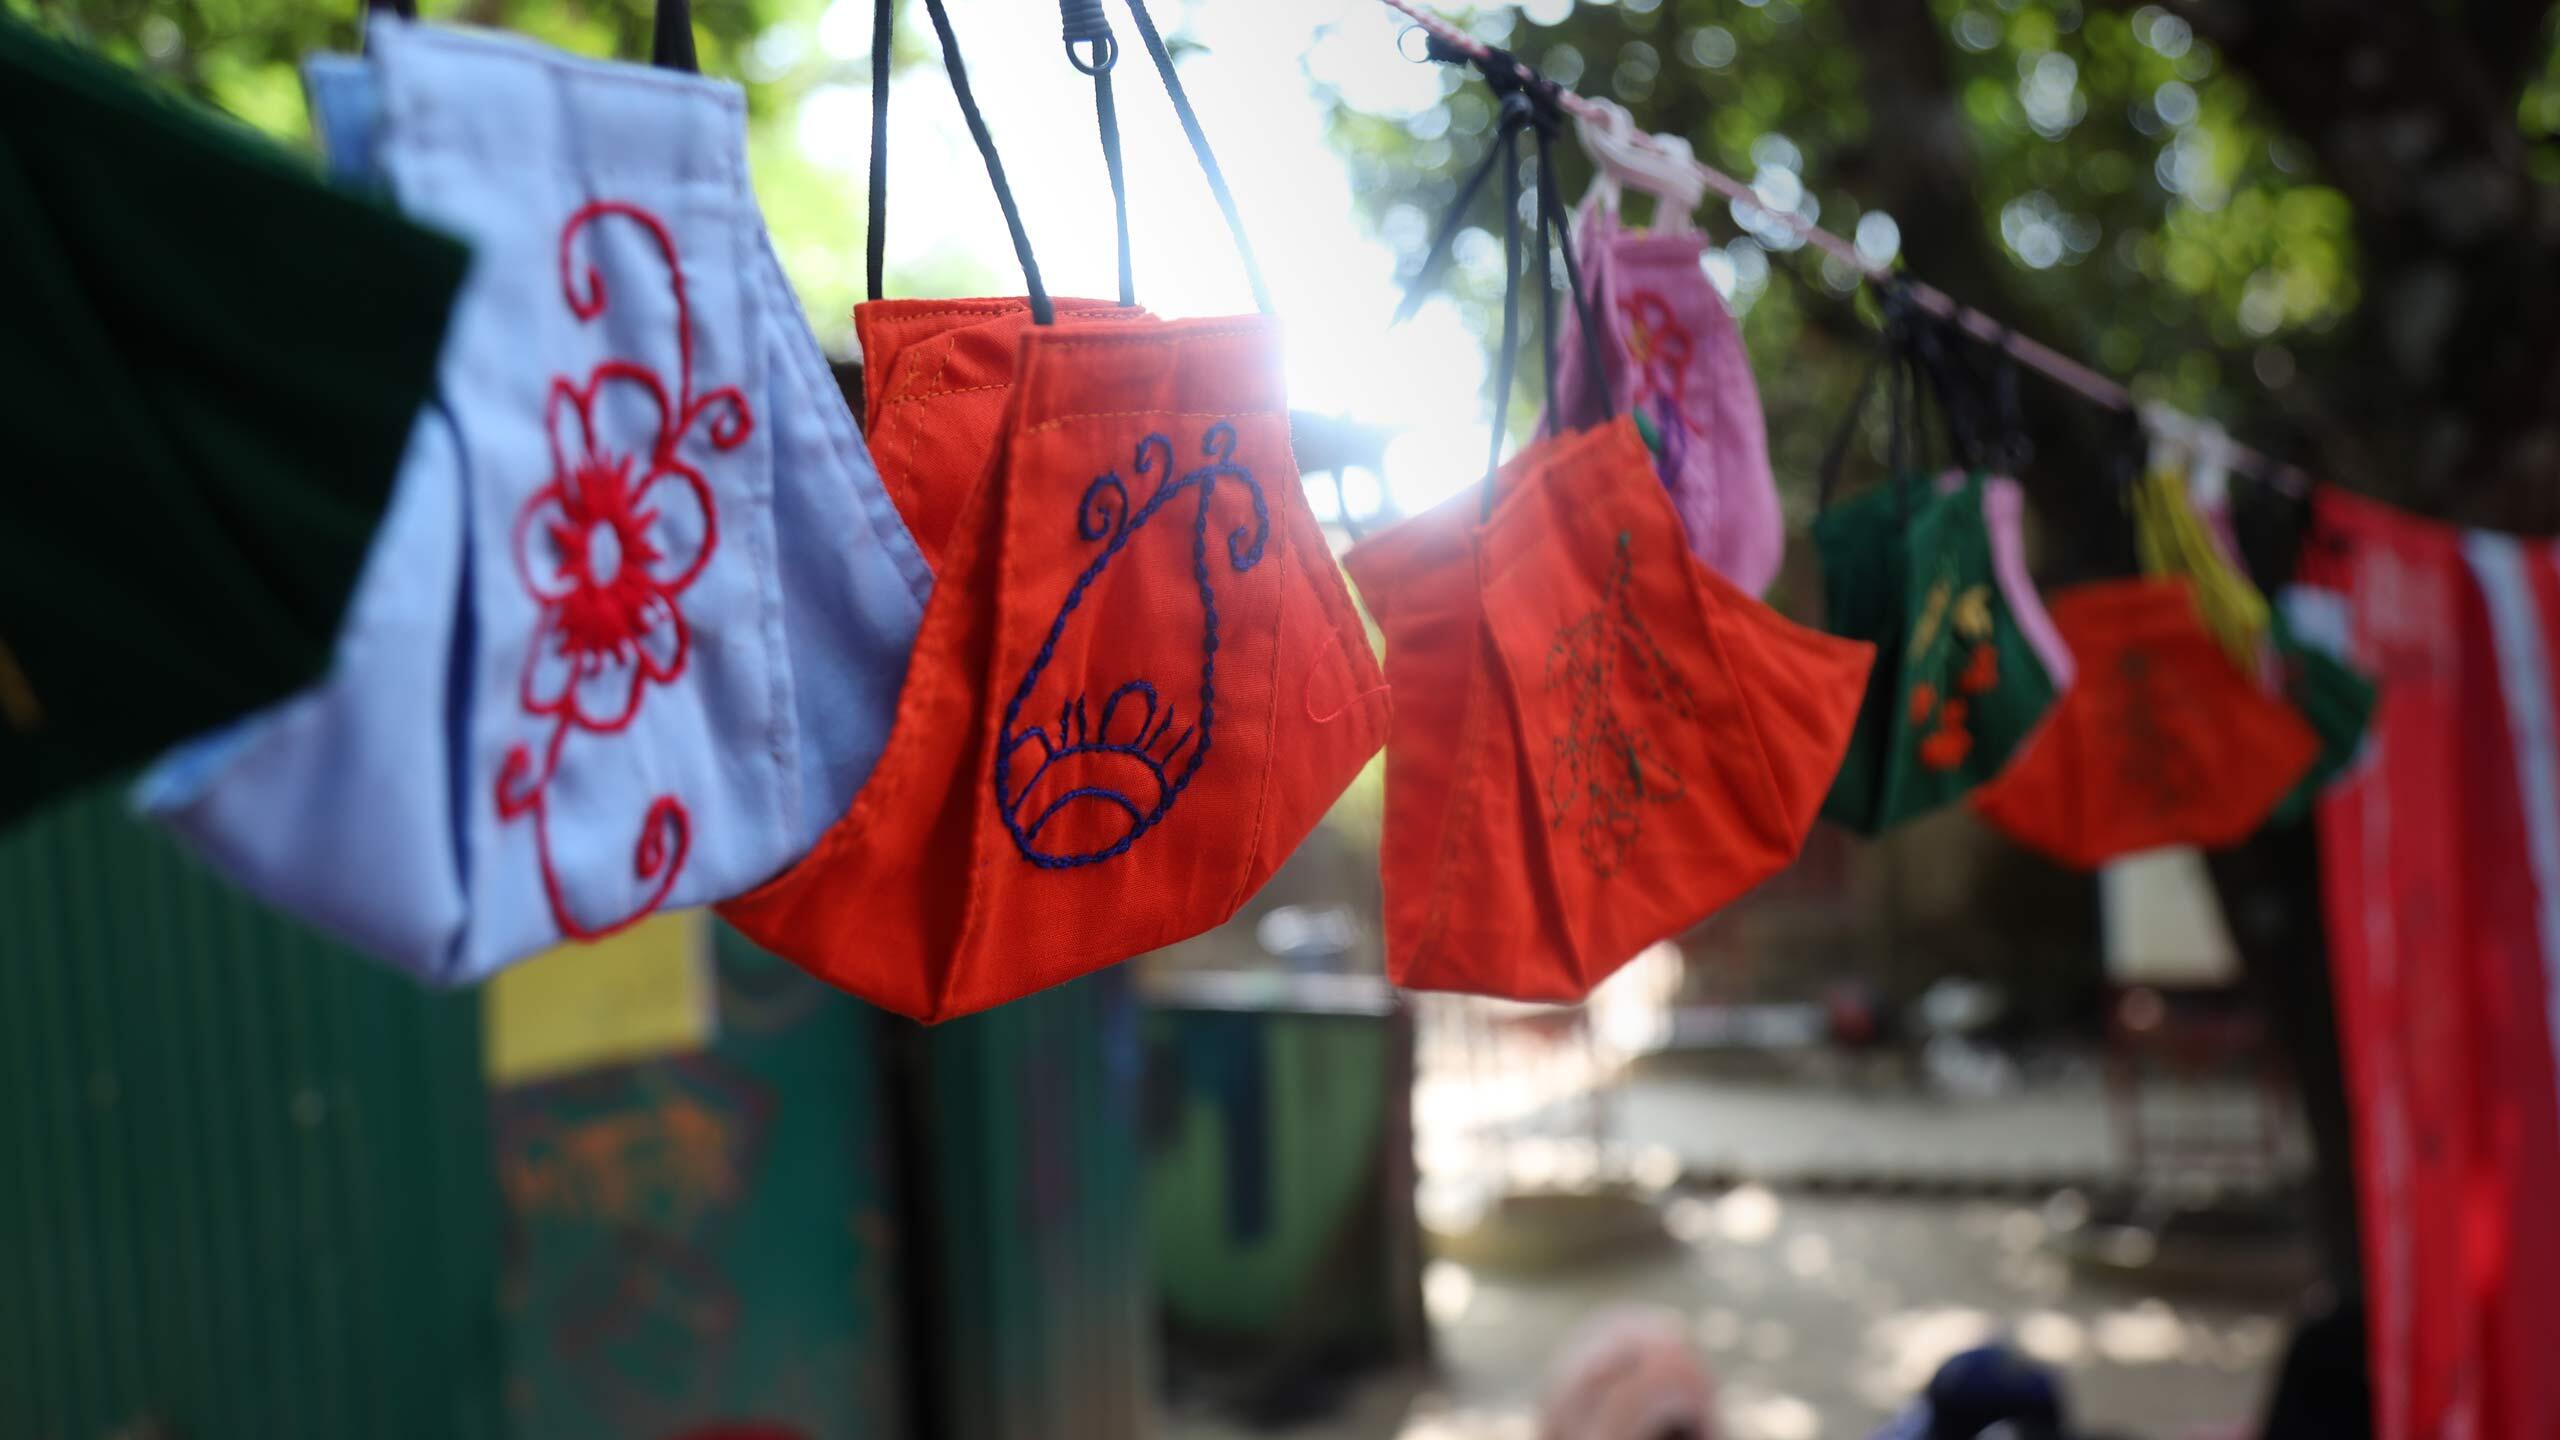 A Rohingya women’s group in the refugee camp of Cox’s Bazar, Bangladesh, came together to produce hand-made, reusable masks so they can make a living, boost their skills and help to protect their community.